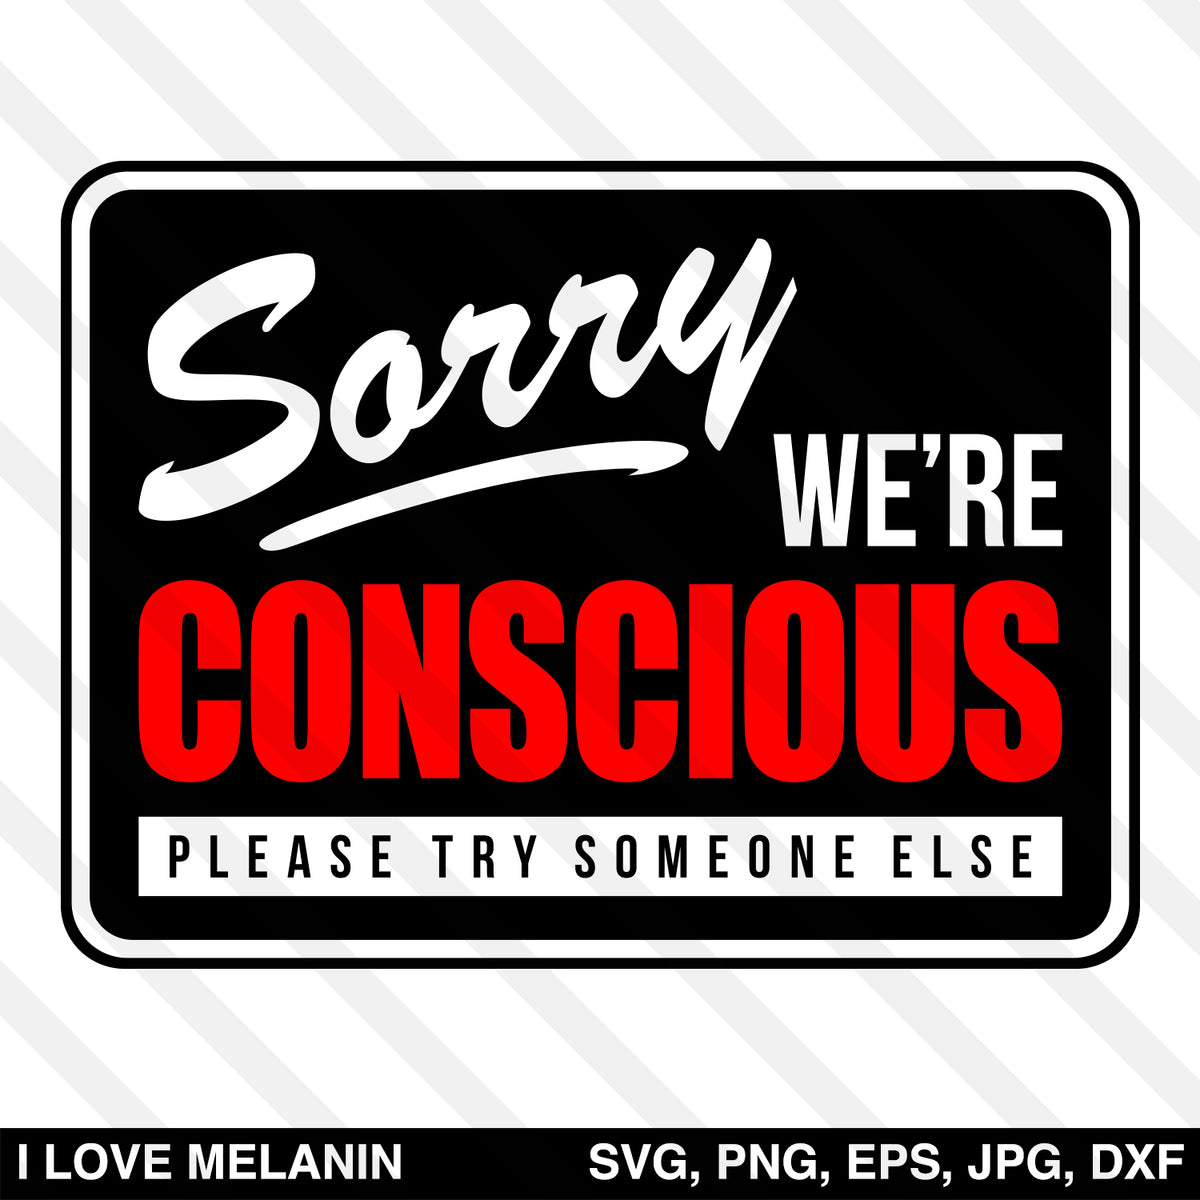 Download Sorry We're Conscious SVG - I Love Melanin